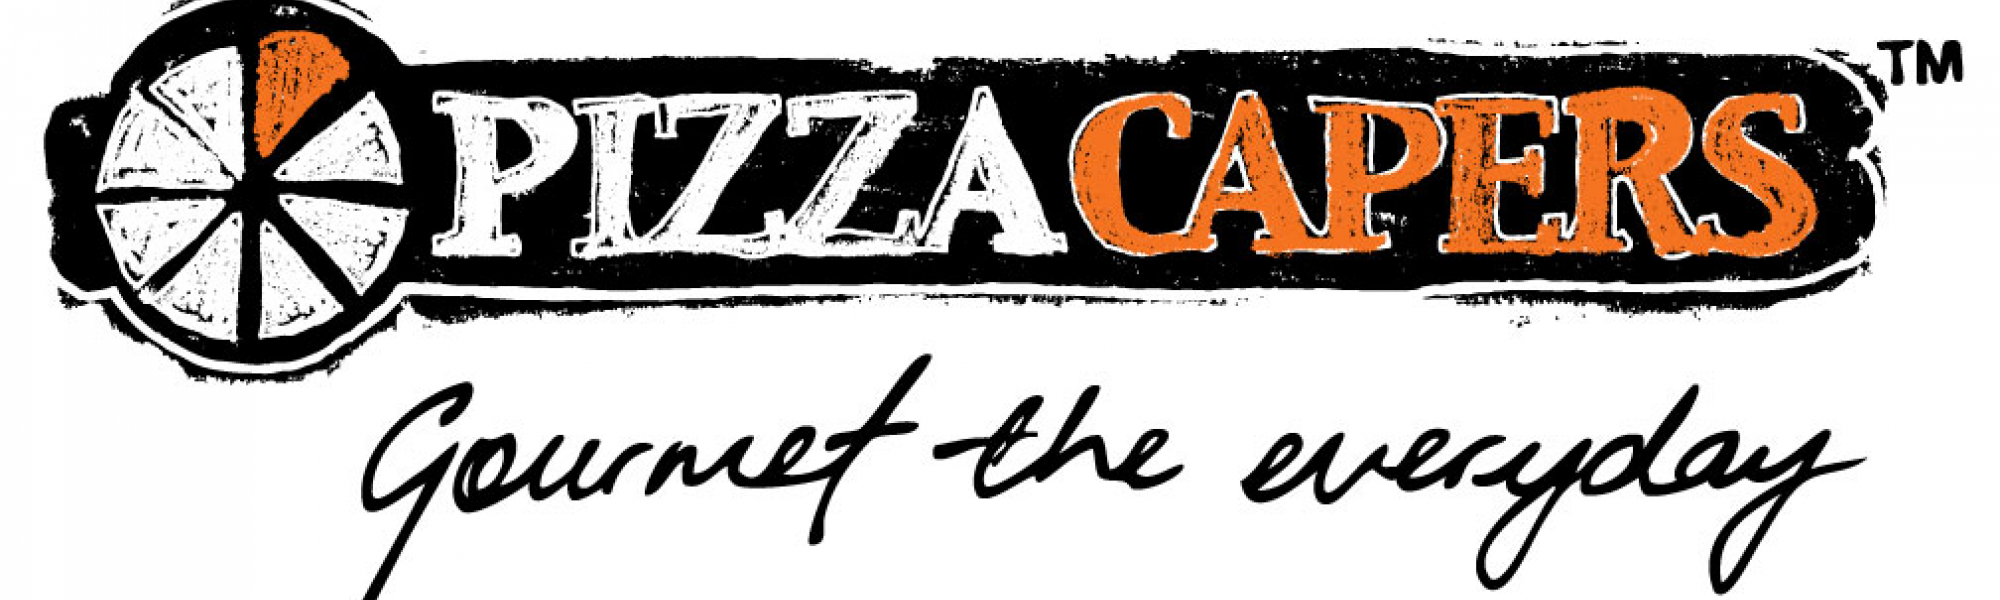 Pizza Capers Toowoomba City